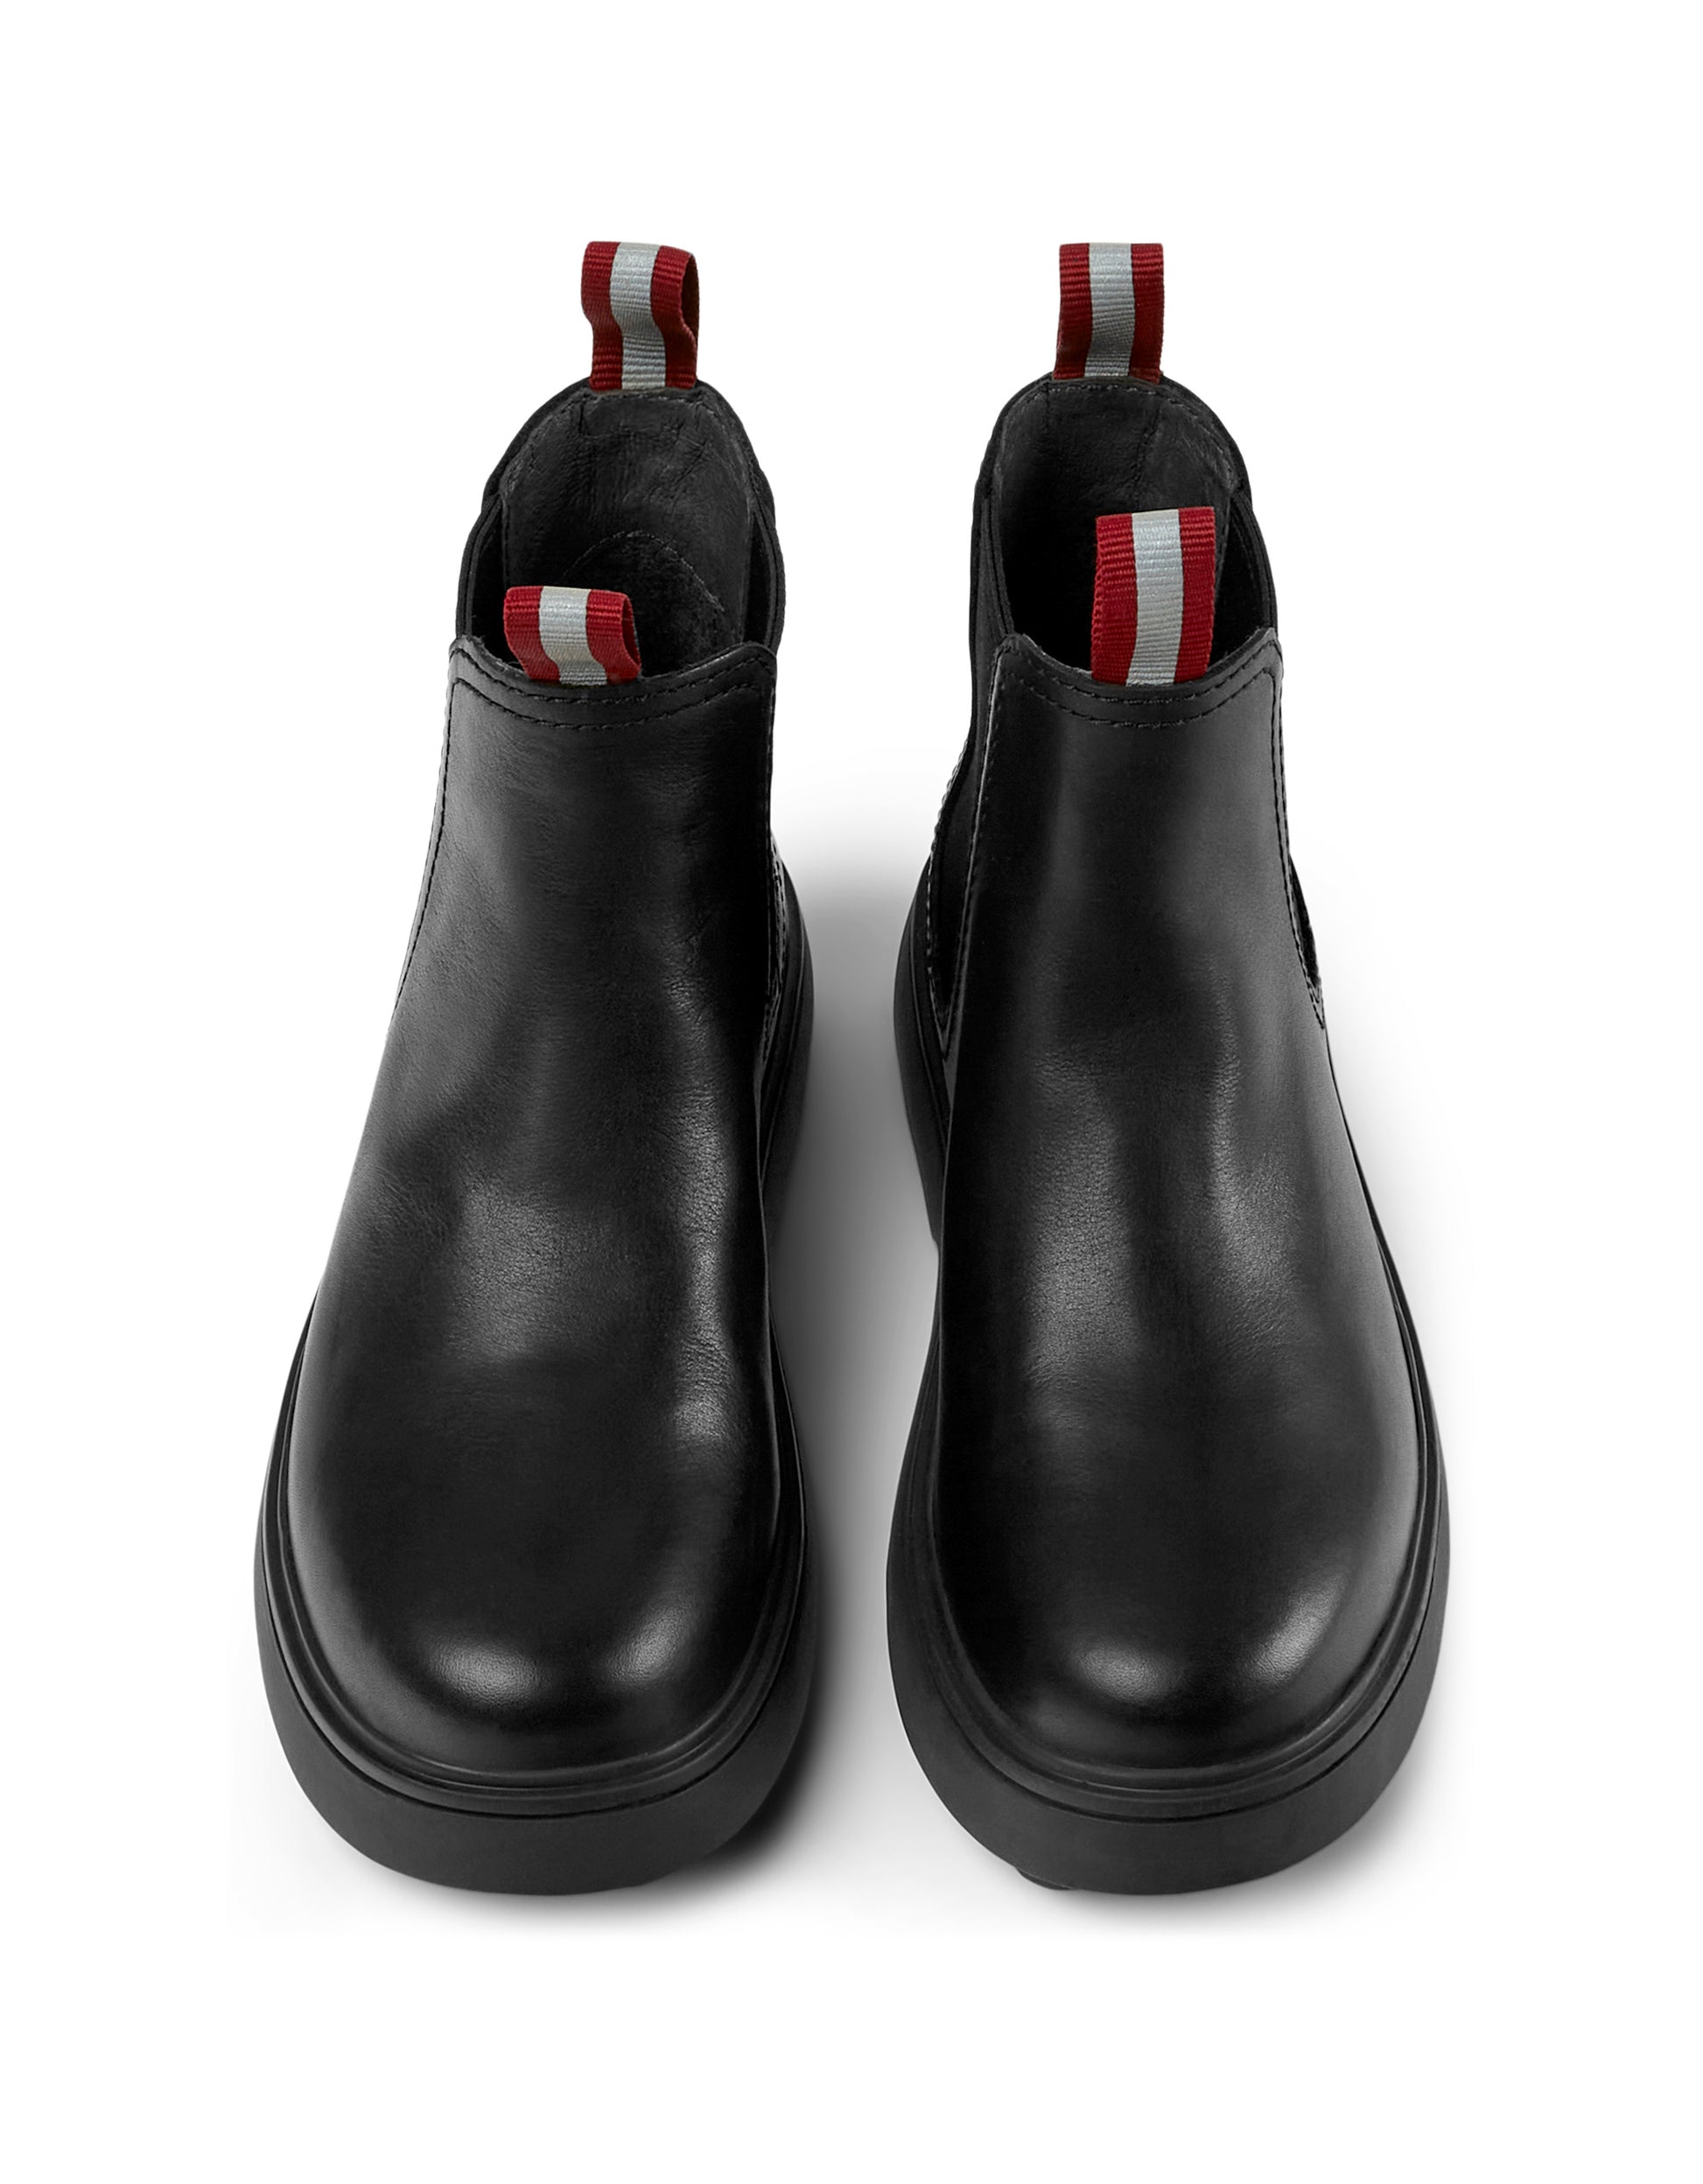 A pair of girls chunky chelsea boots by Camper, style K900149-001,in black leather,pull on style. Above view.